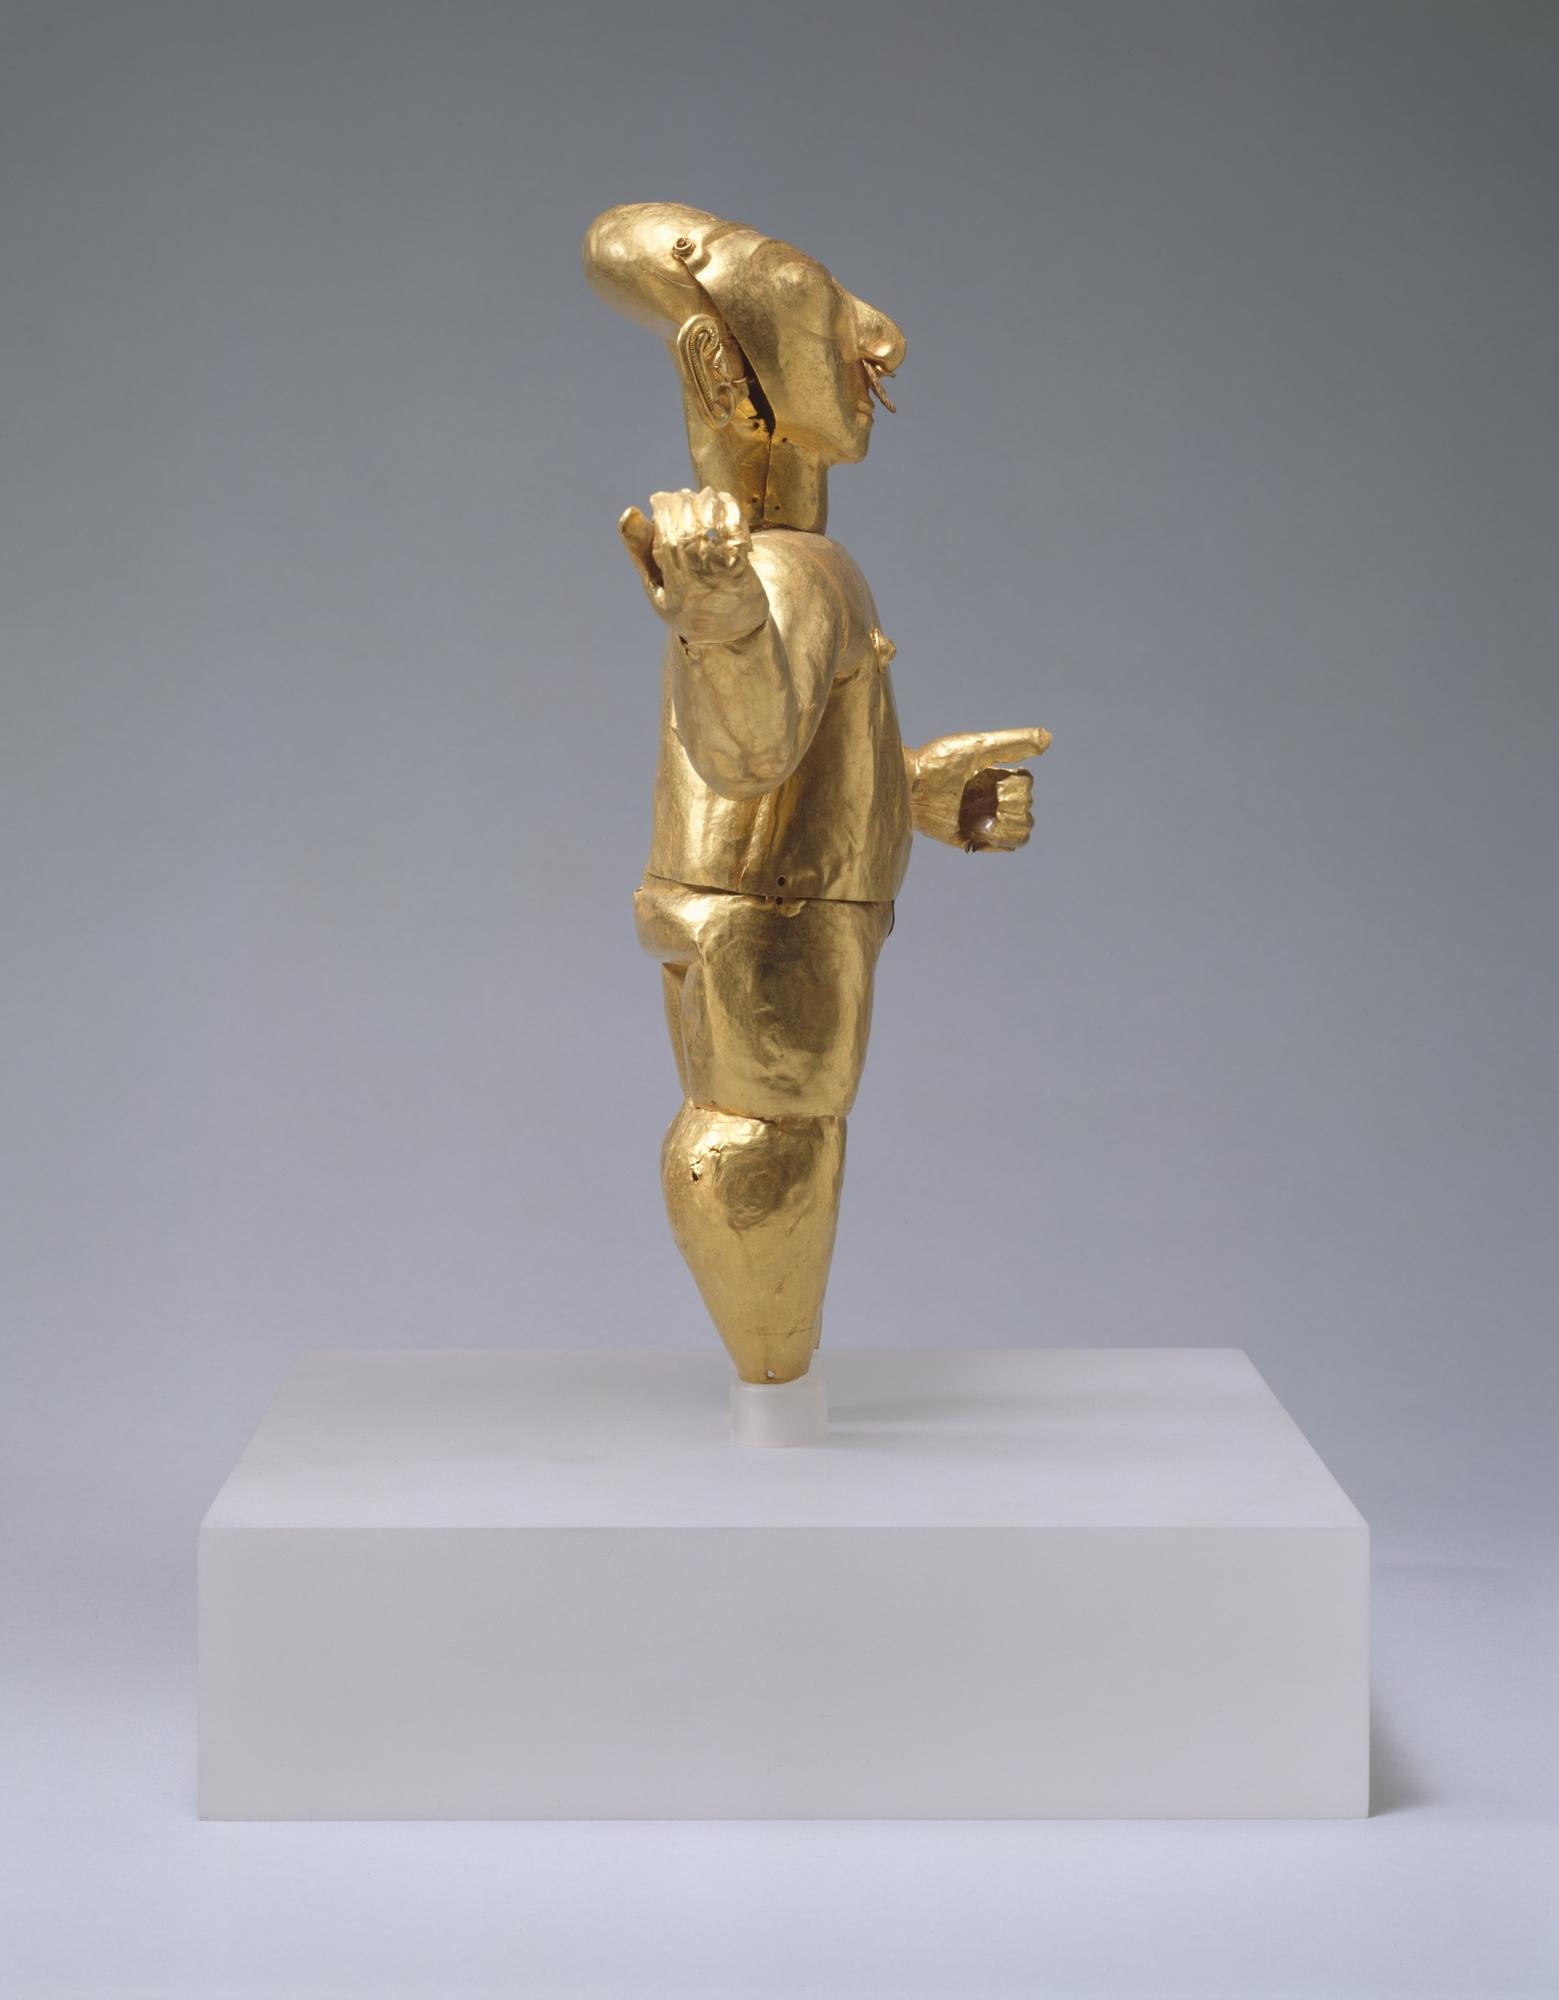 The Tolita-Tumaco culture, side view of Standing Figure, 100 B.C.–A.D. 100, Gold.